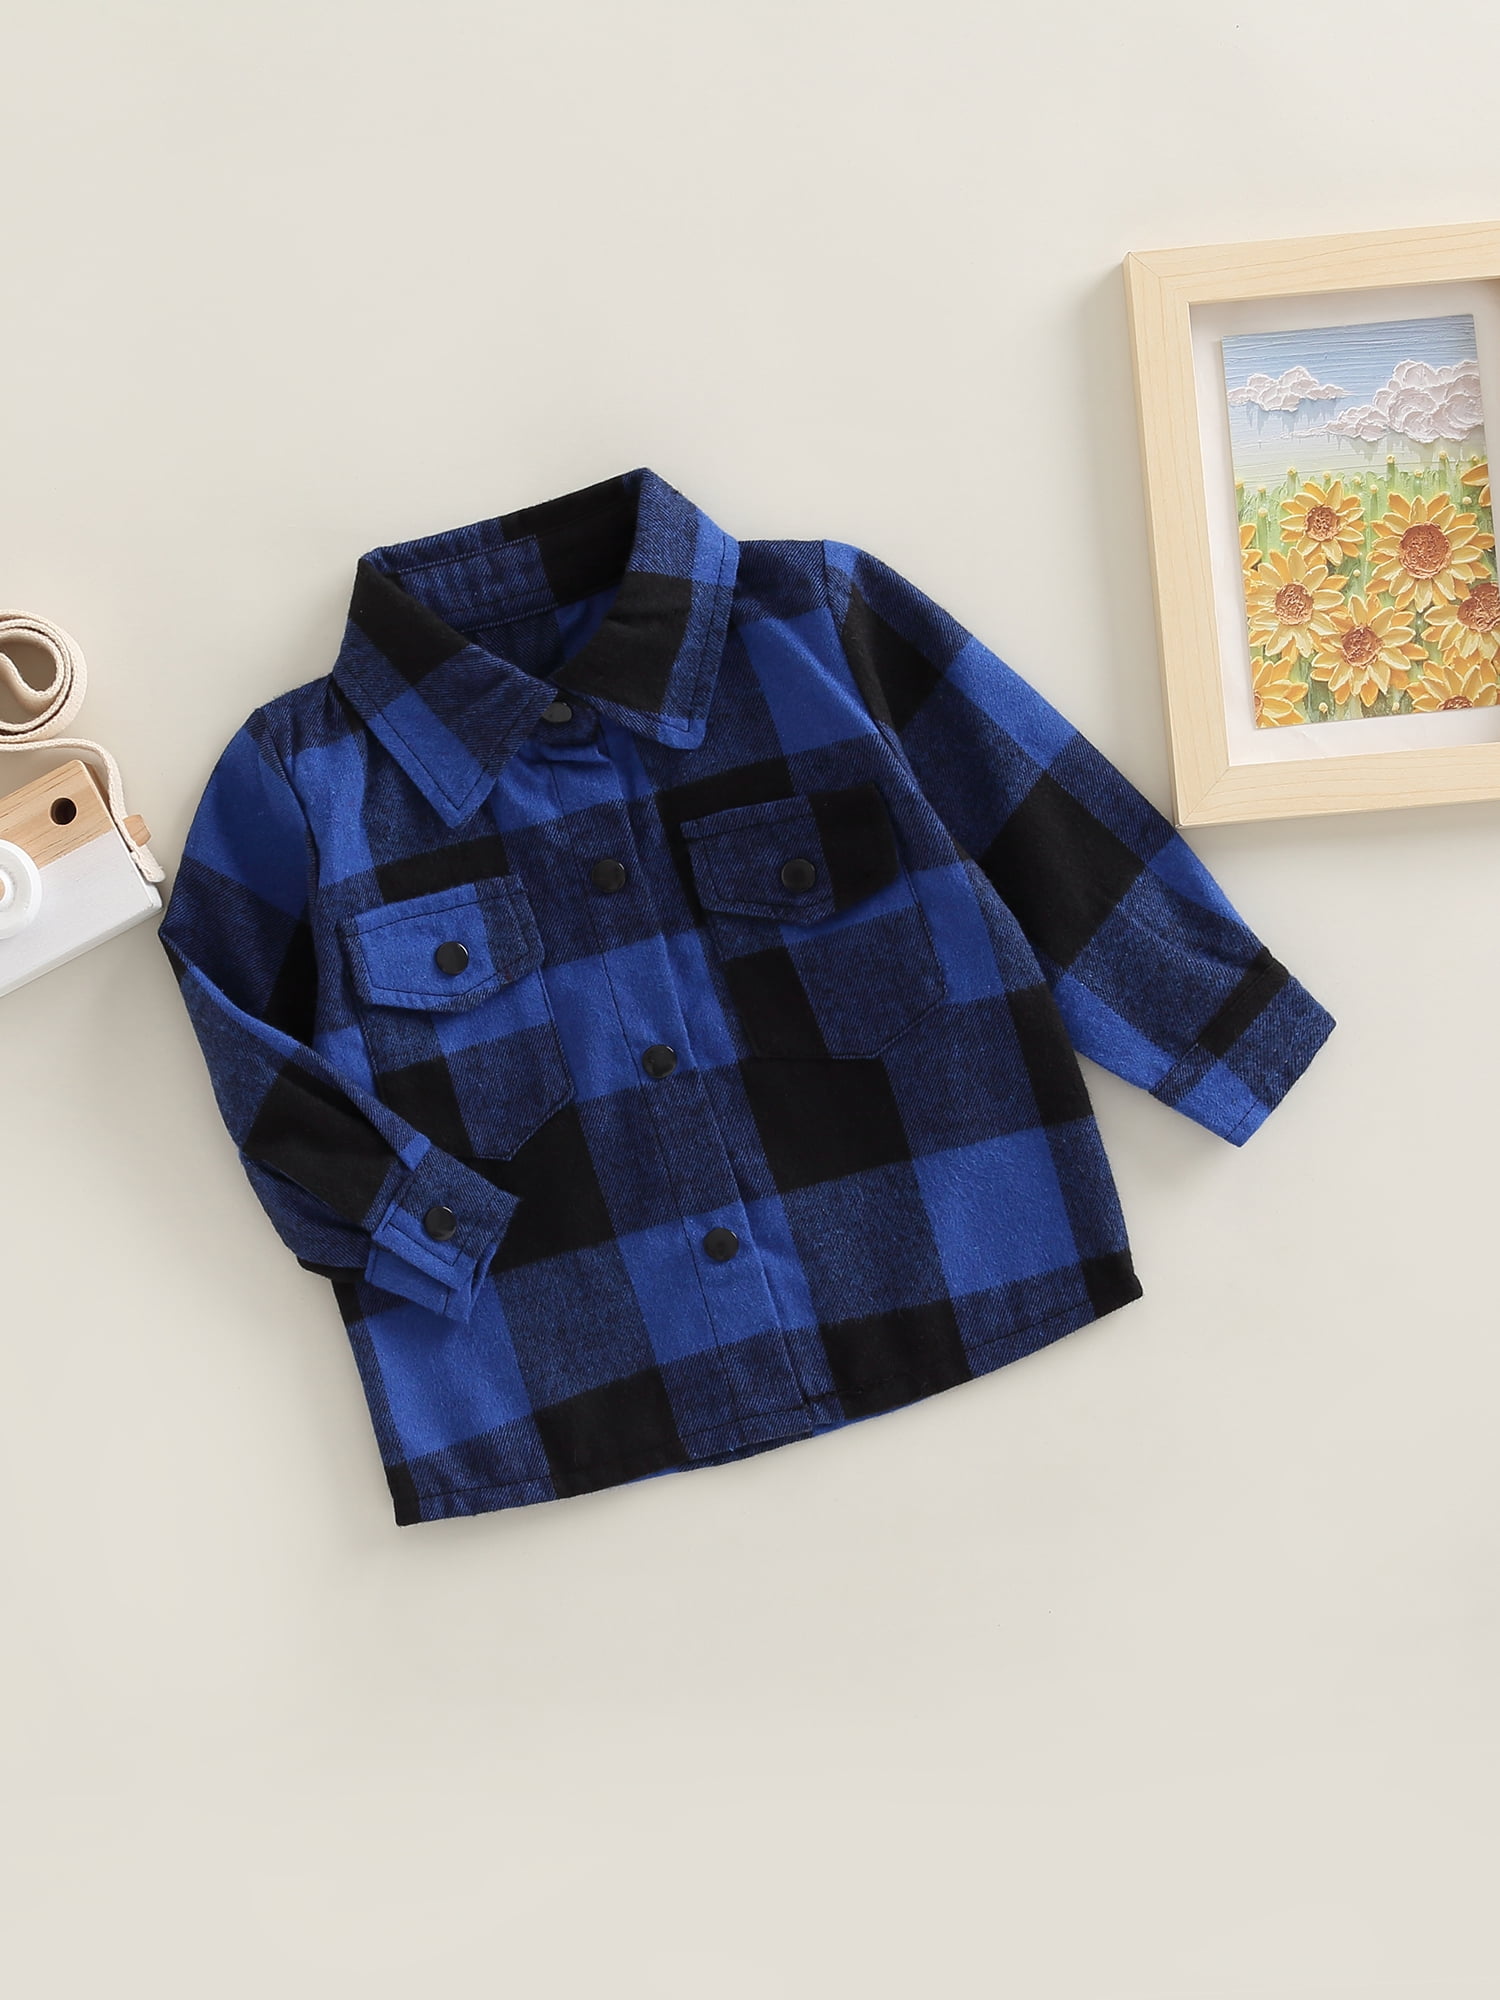 Wybzd Toddler Baby Boys Girls Flannel Plaid Shirts Long Sleeve Lepel Button Down Back Letters Print Coat Tops Outwear Brown 1-2 Years, Infant Unisex